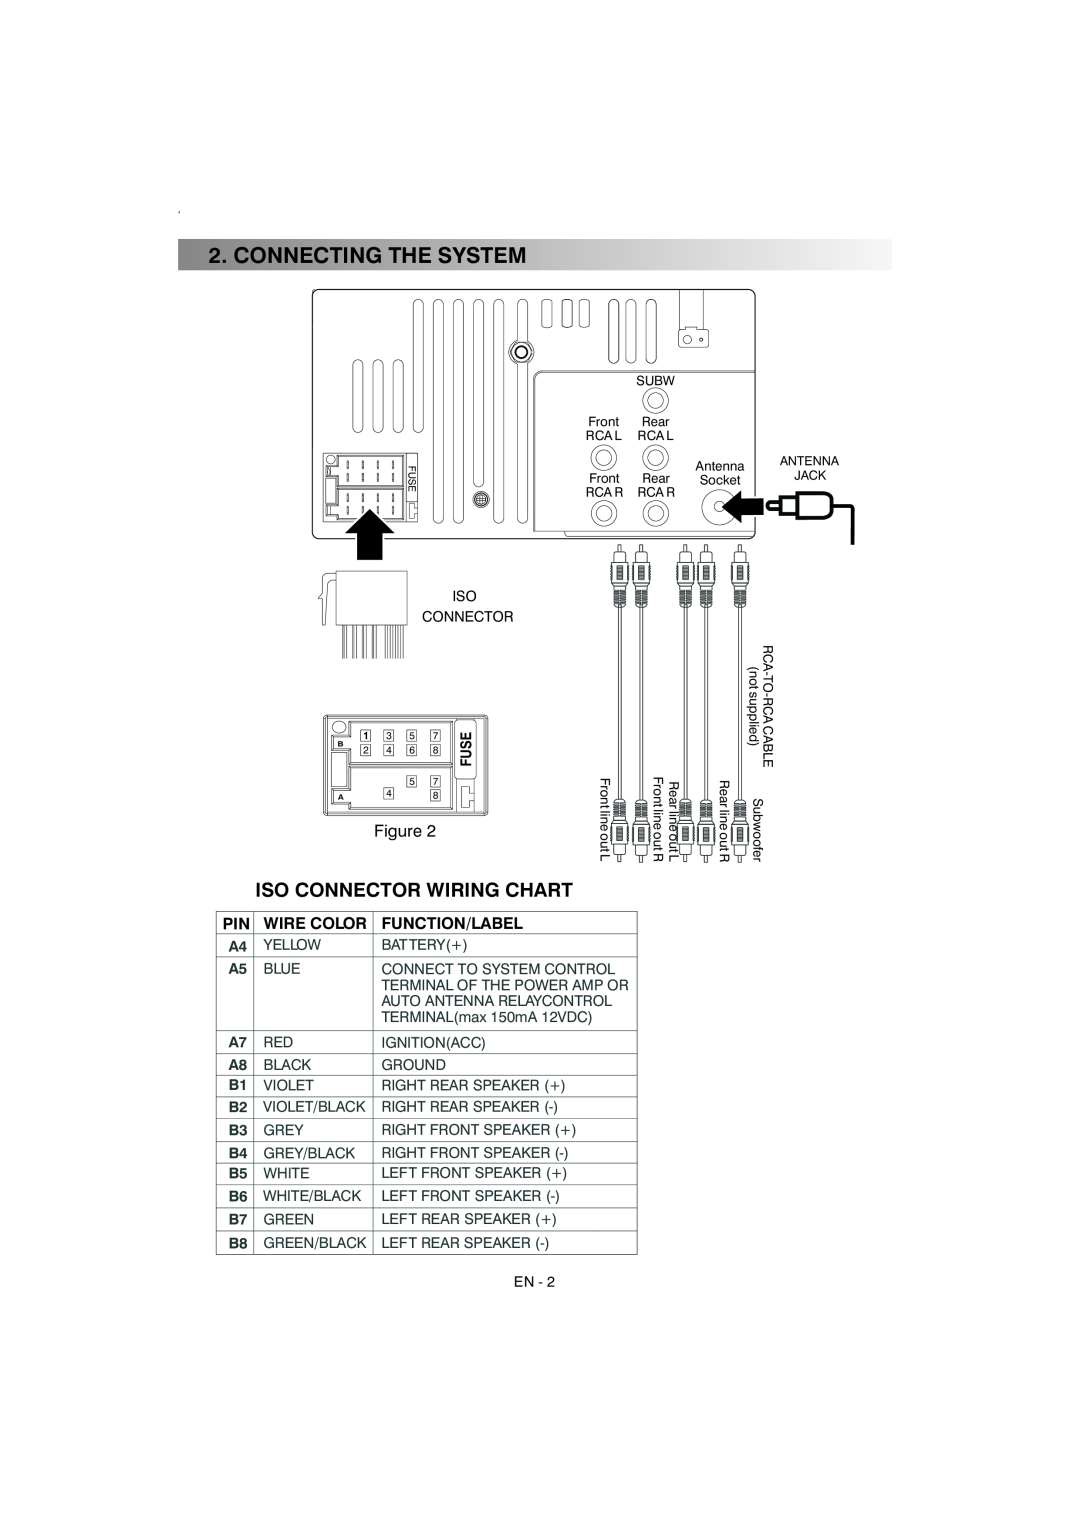 Boss Audio Systems 870DBI manual Connecting The System, Iso Connector Wiring Chart, Wire Color, Function/Label 